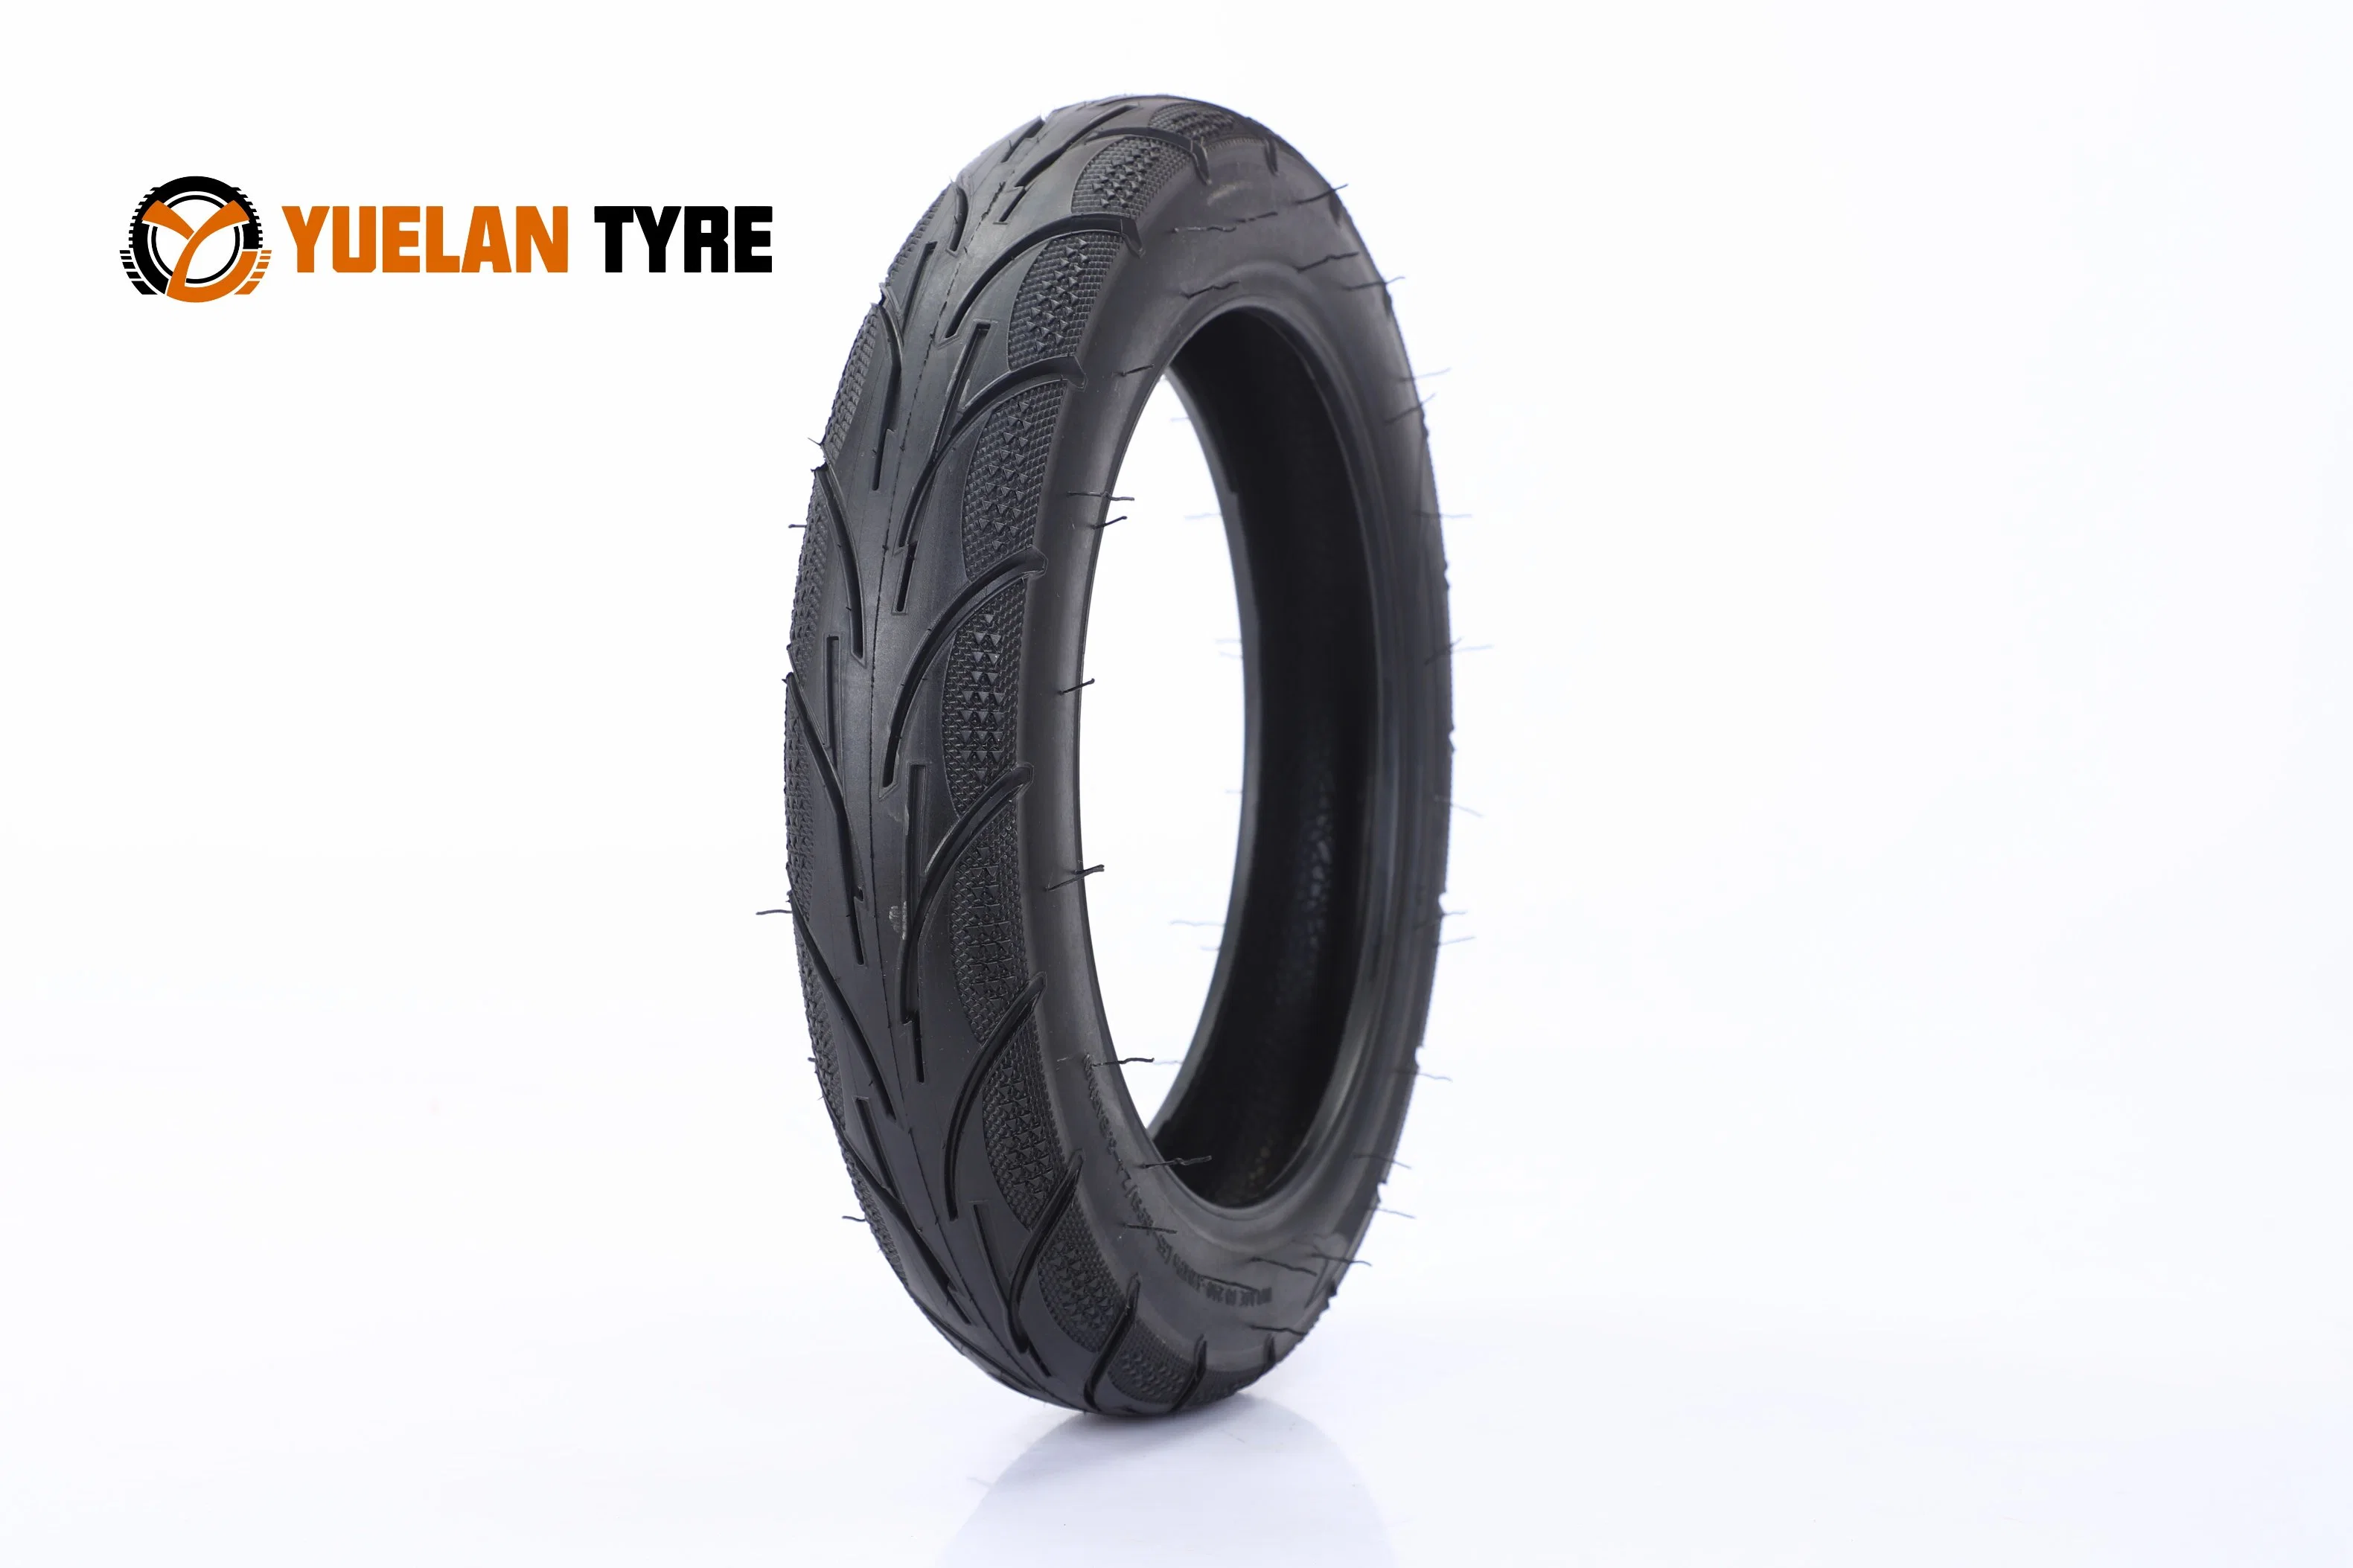 2022 Hot Selling 14 Inch Rubber Tire 14X2.5 Tyre Parts for Foldable Electric Motorcycle E-Bike Scooter